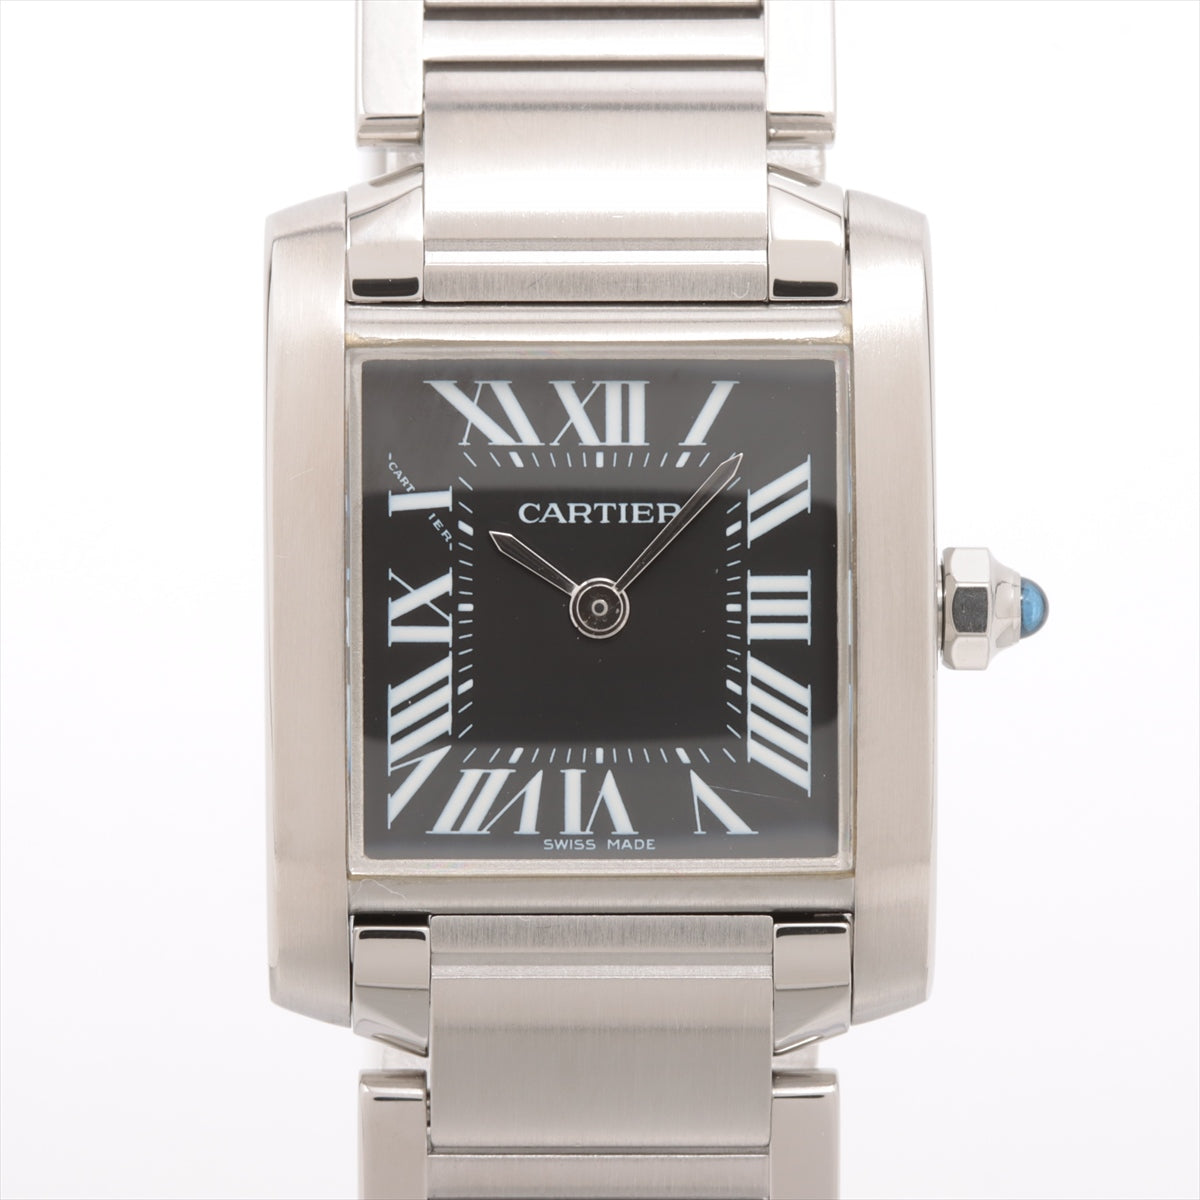 Cartier Tank Francaise SM W51026Q3 SS QZ Black-Face Extra Link 2 Limited to Asia